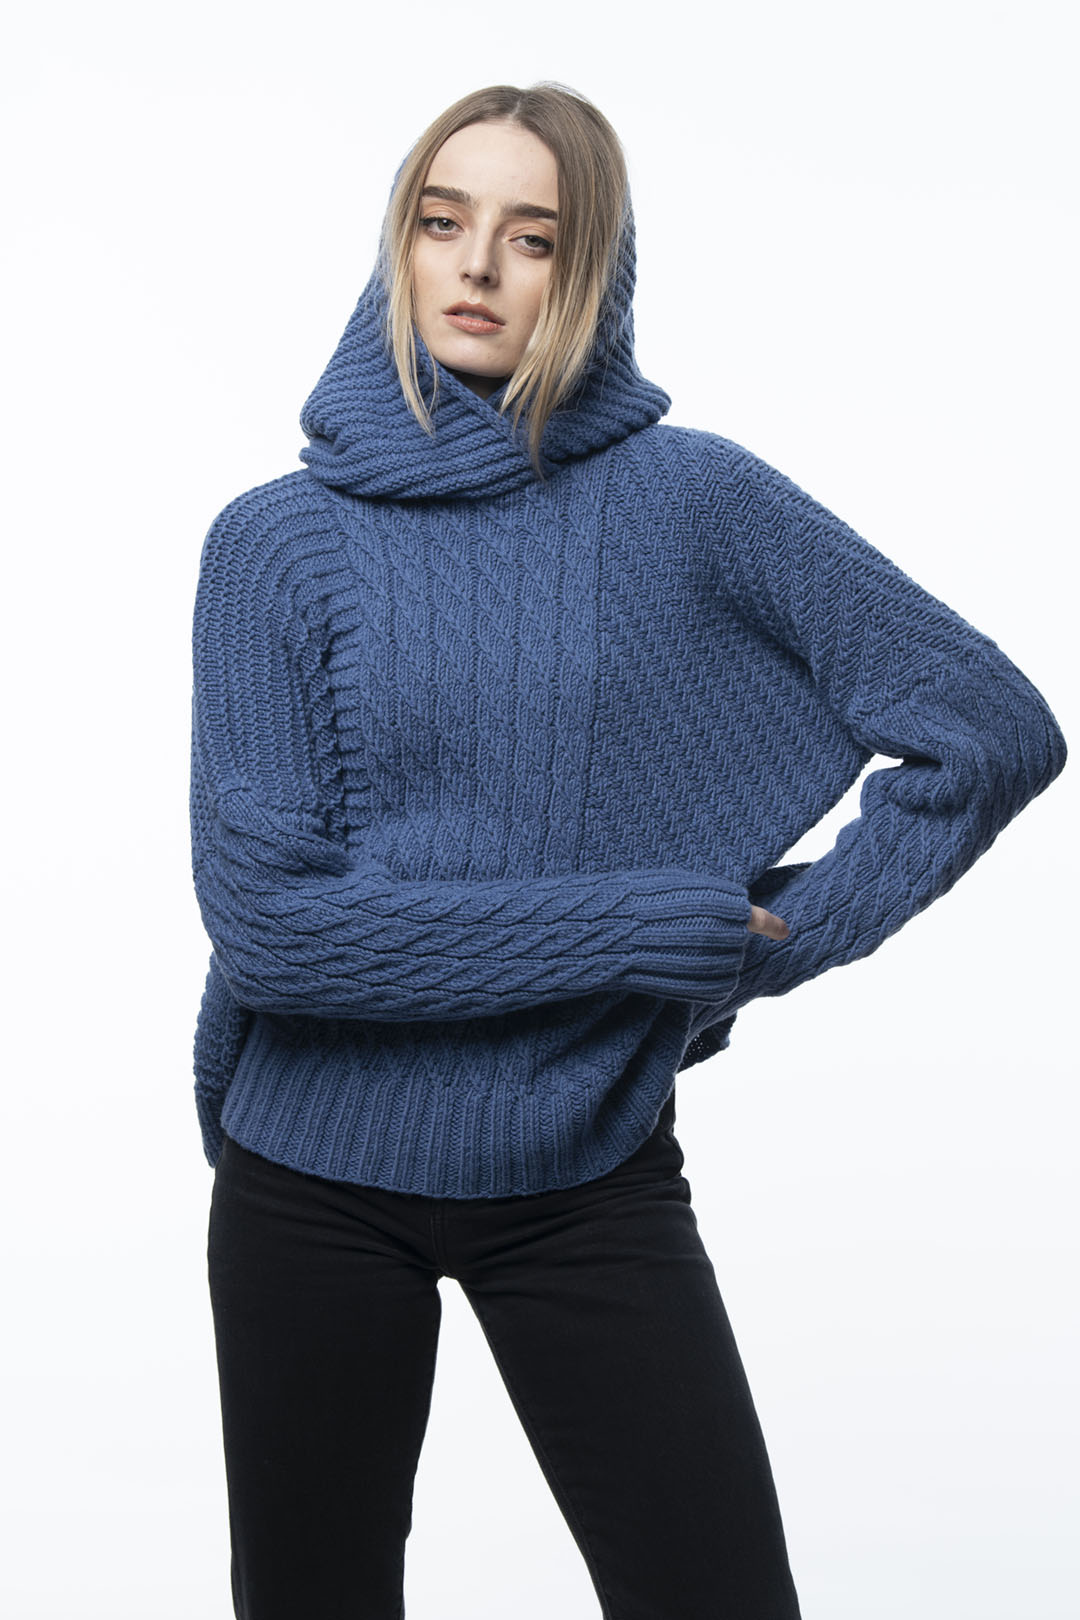 Seigfried Hooded Sweater